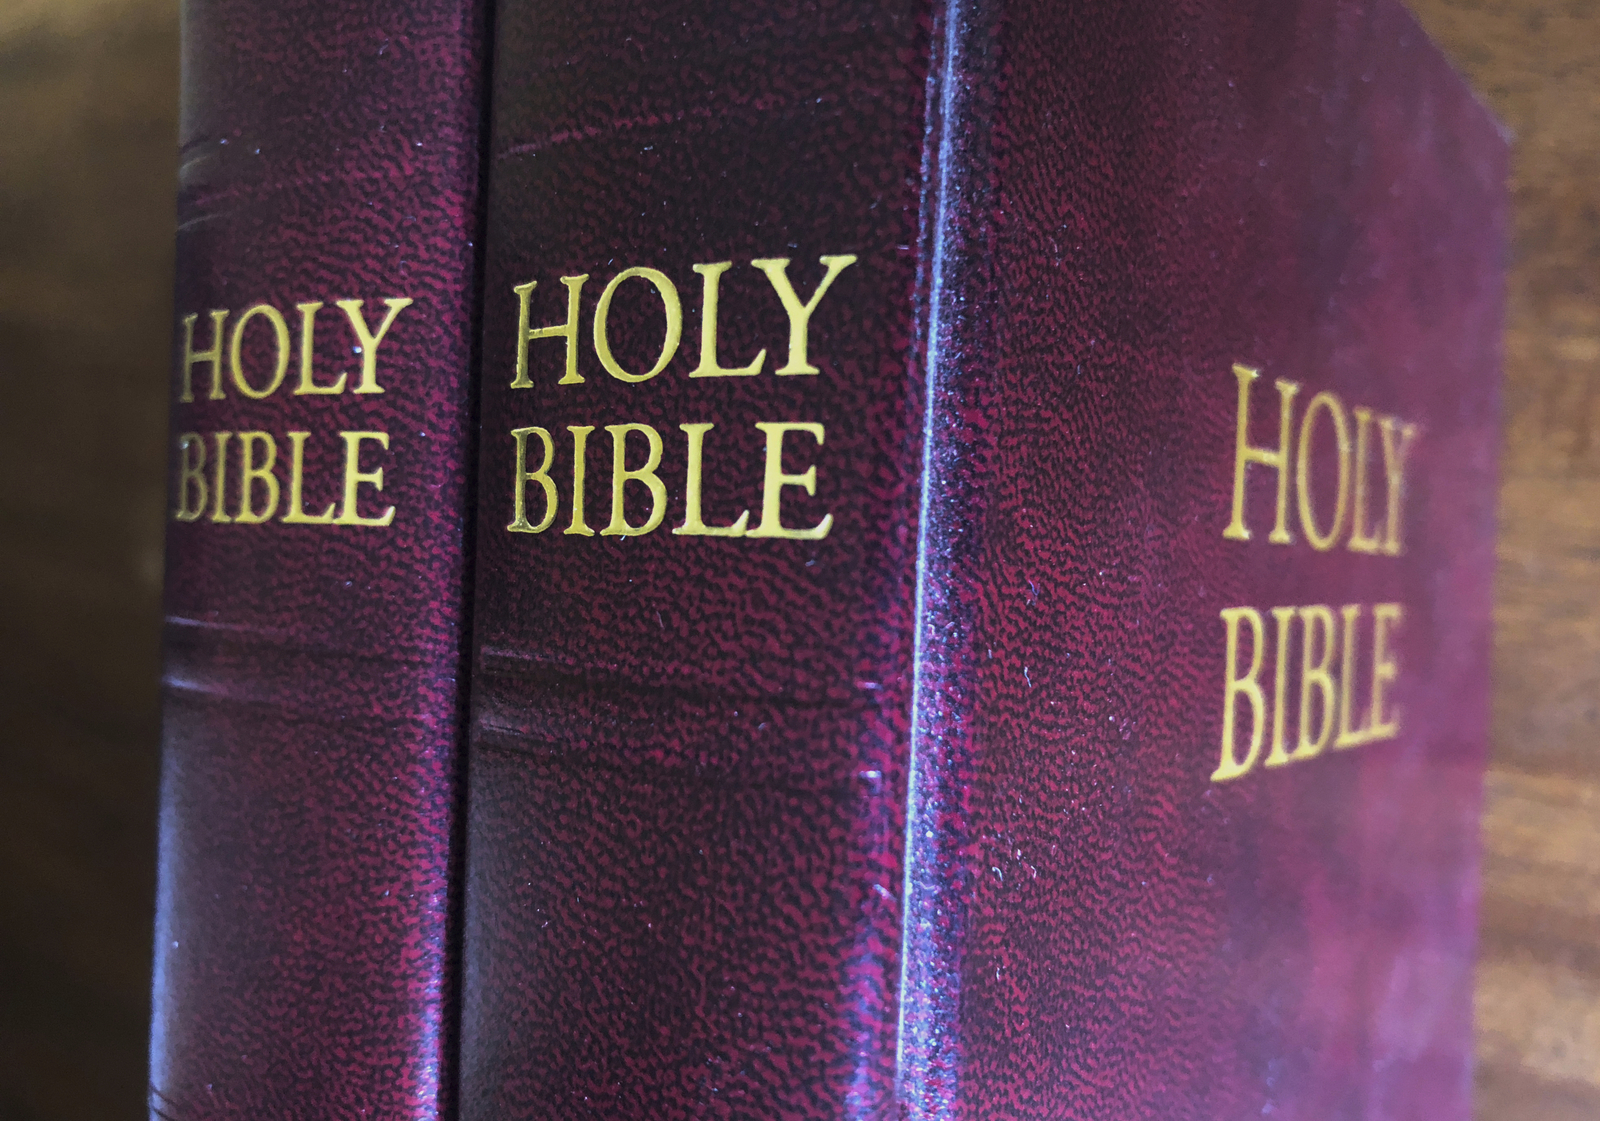 Oklahoma state superintendent orders schools to teach the Bible in grades 5 through 12